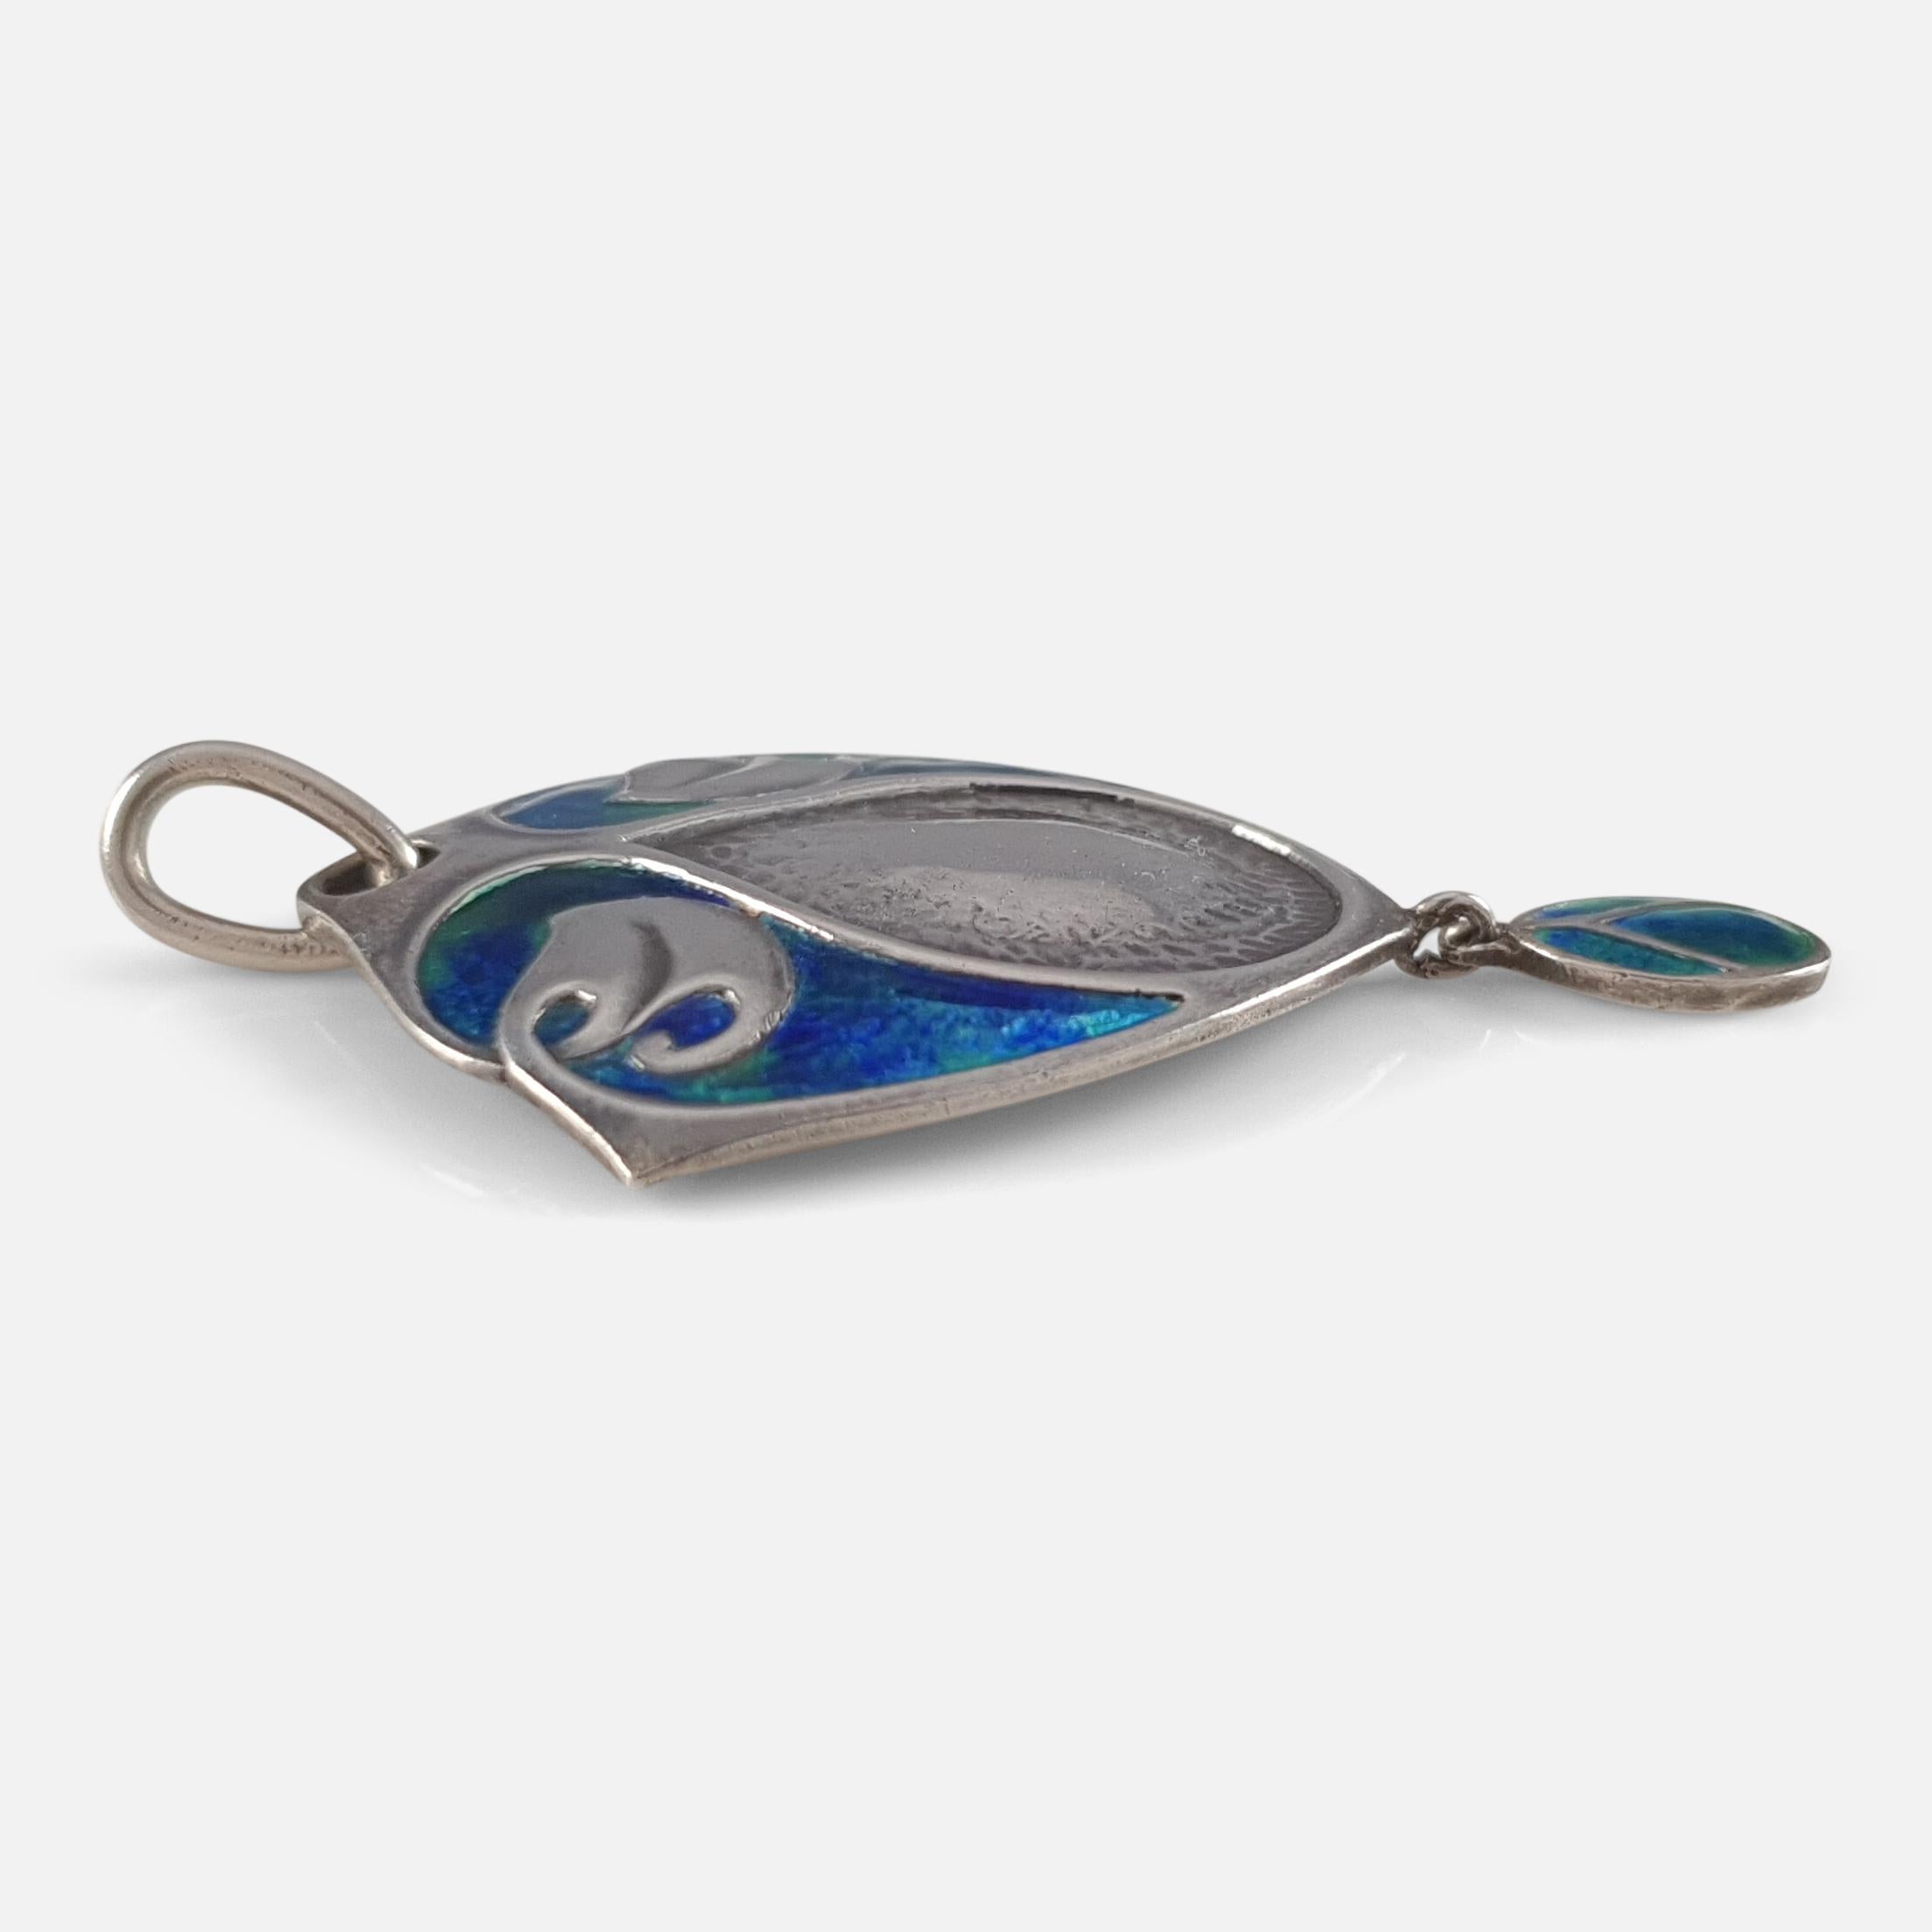 Murrle Bennett & Co Arts & Crafts Silver and Enamel Drop Pendant, circa 1905 (Arts and Crafts)